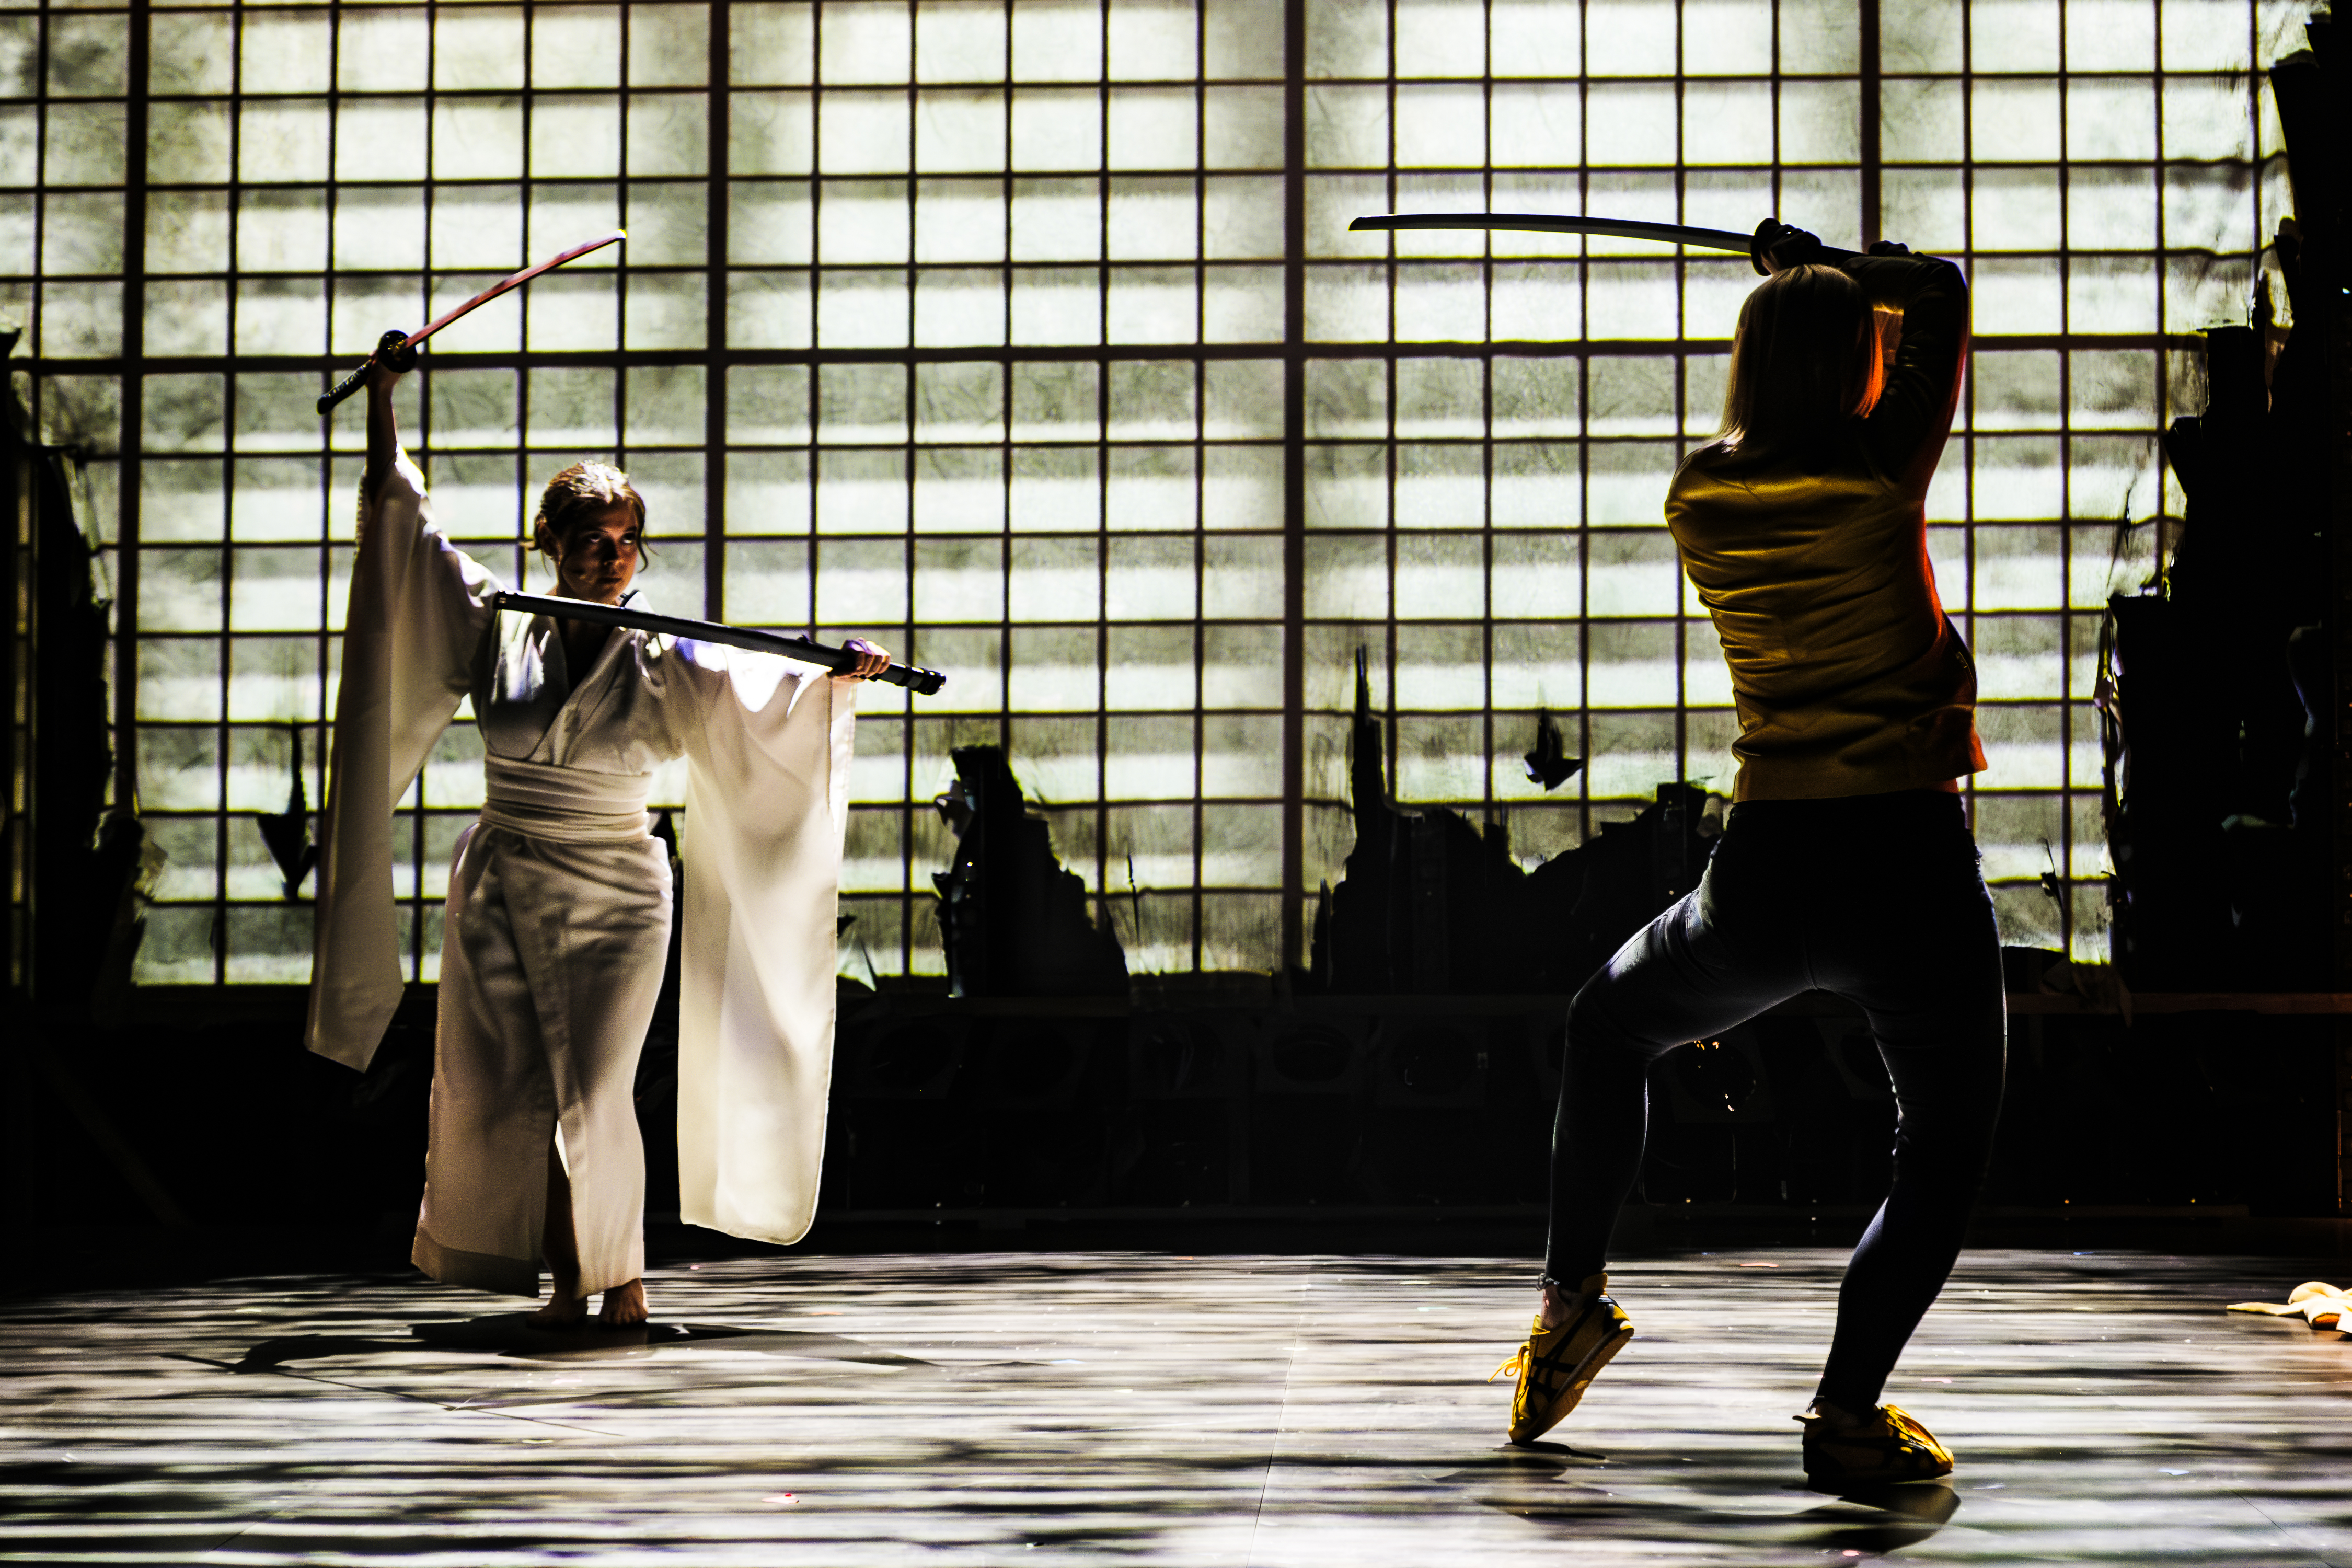 A scene from Tarantino Live with two women holding swords and circling each other, inspired by the film Kill Bill